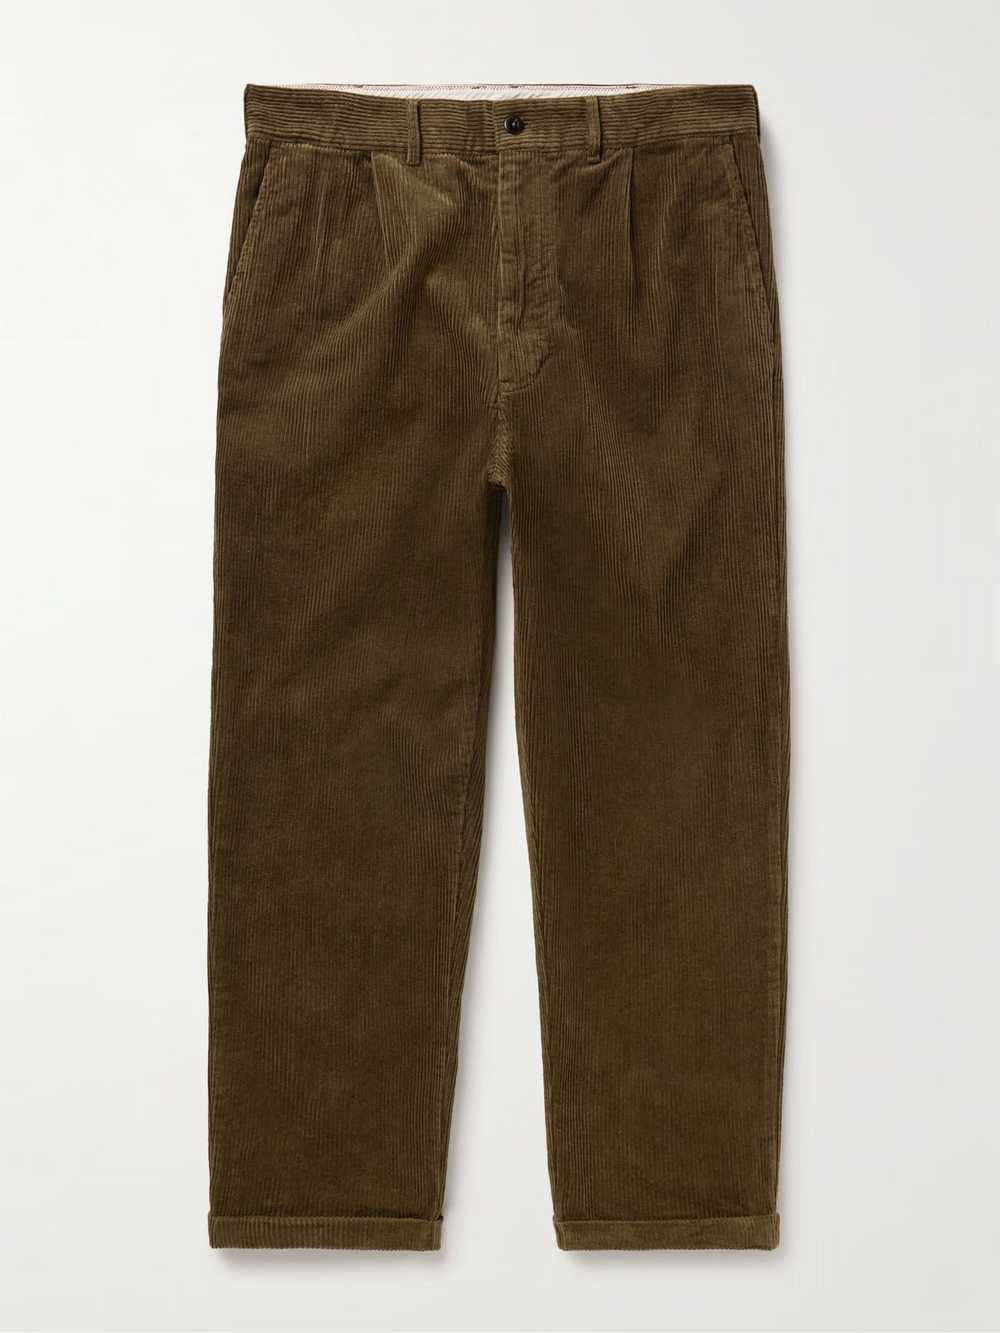 Alex Mill Tapered Pleated Cotton-Corduroy Trousers - image 7